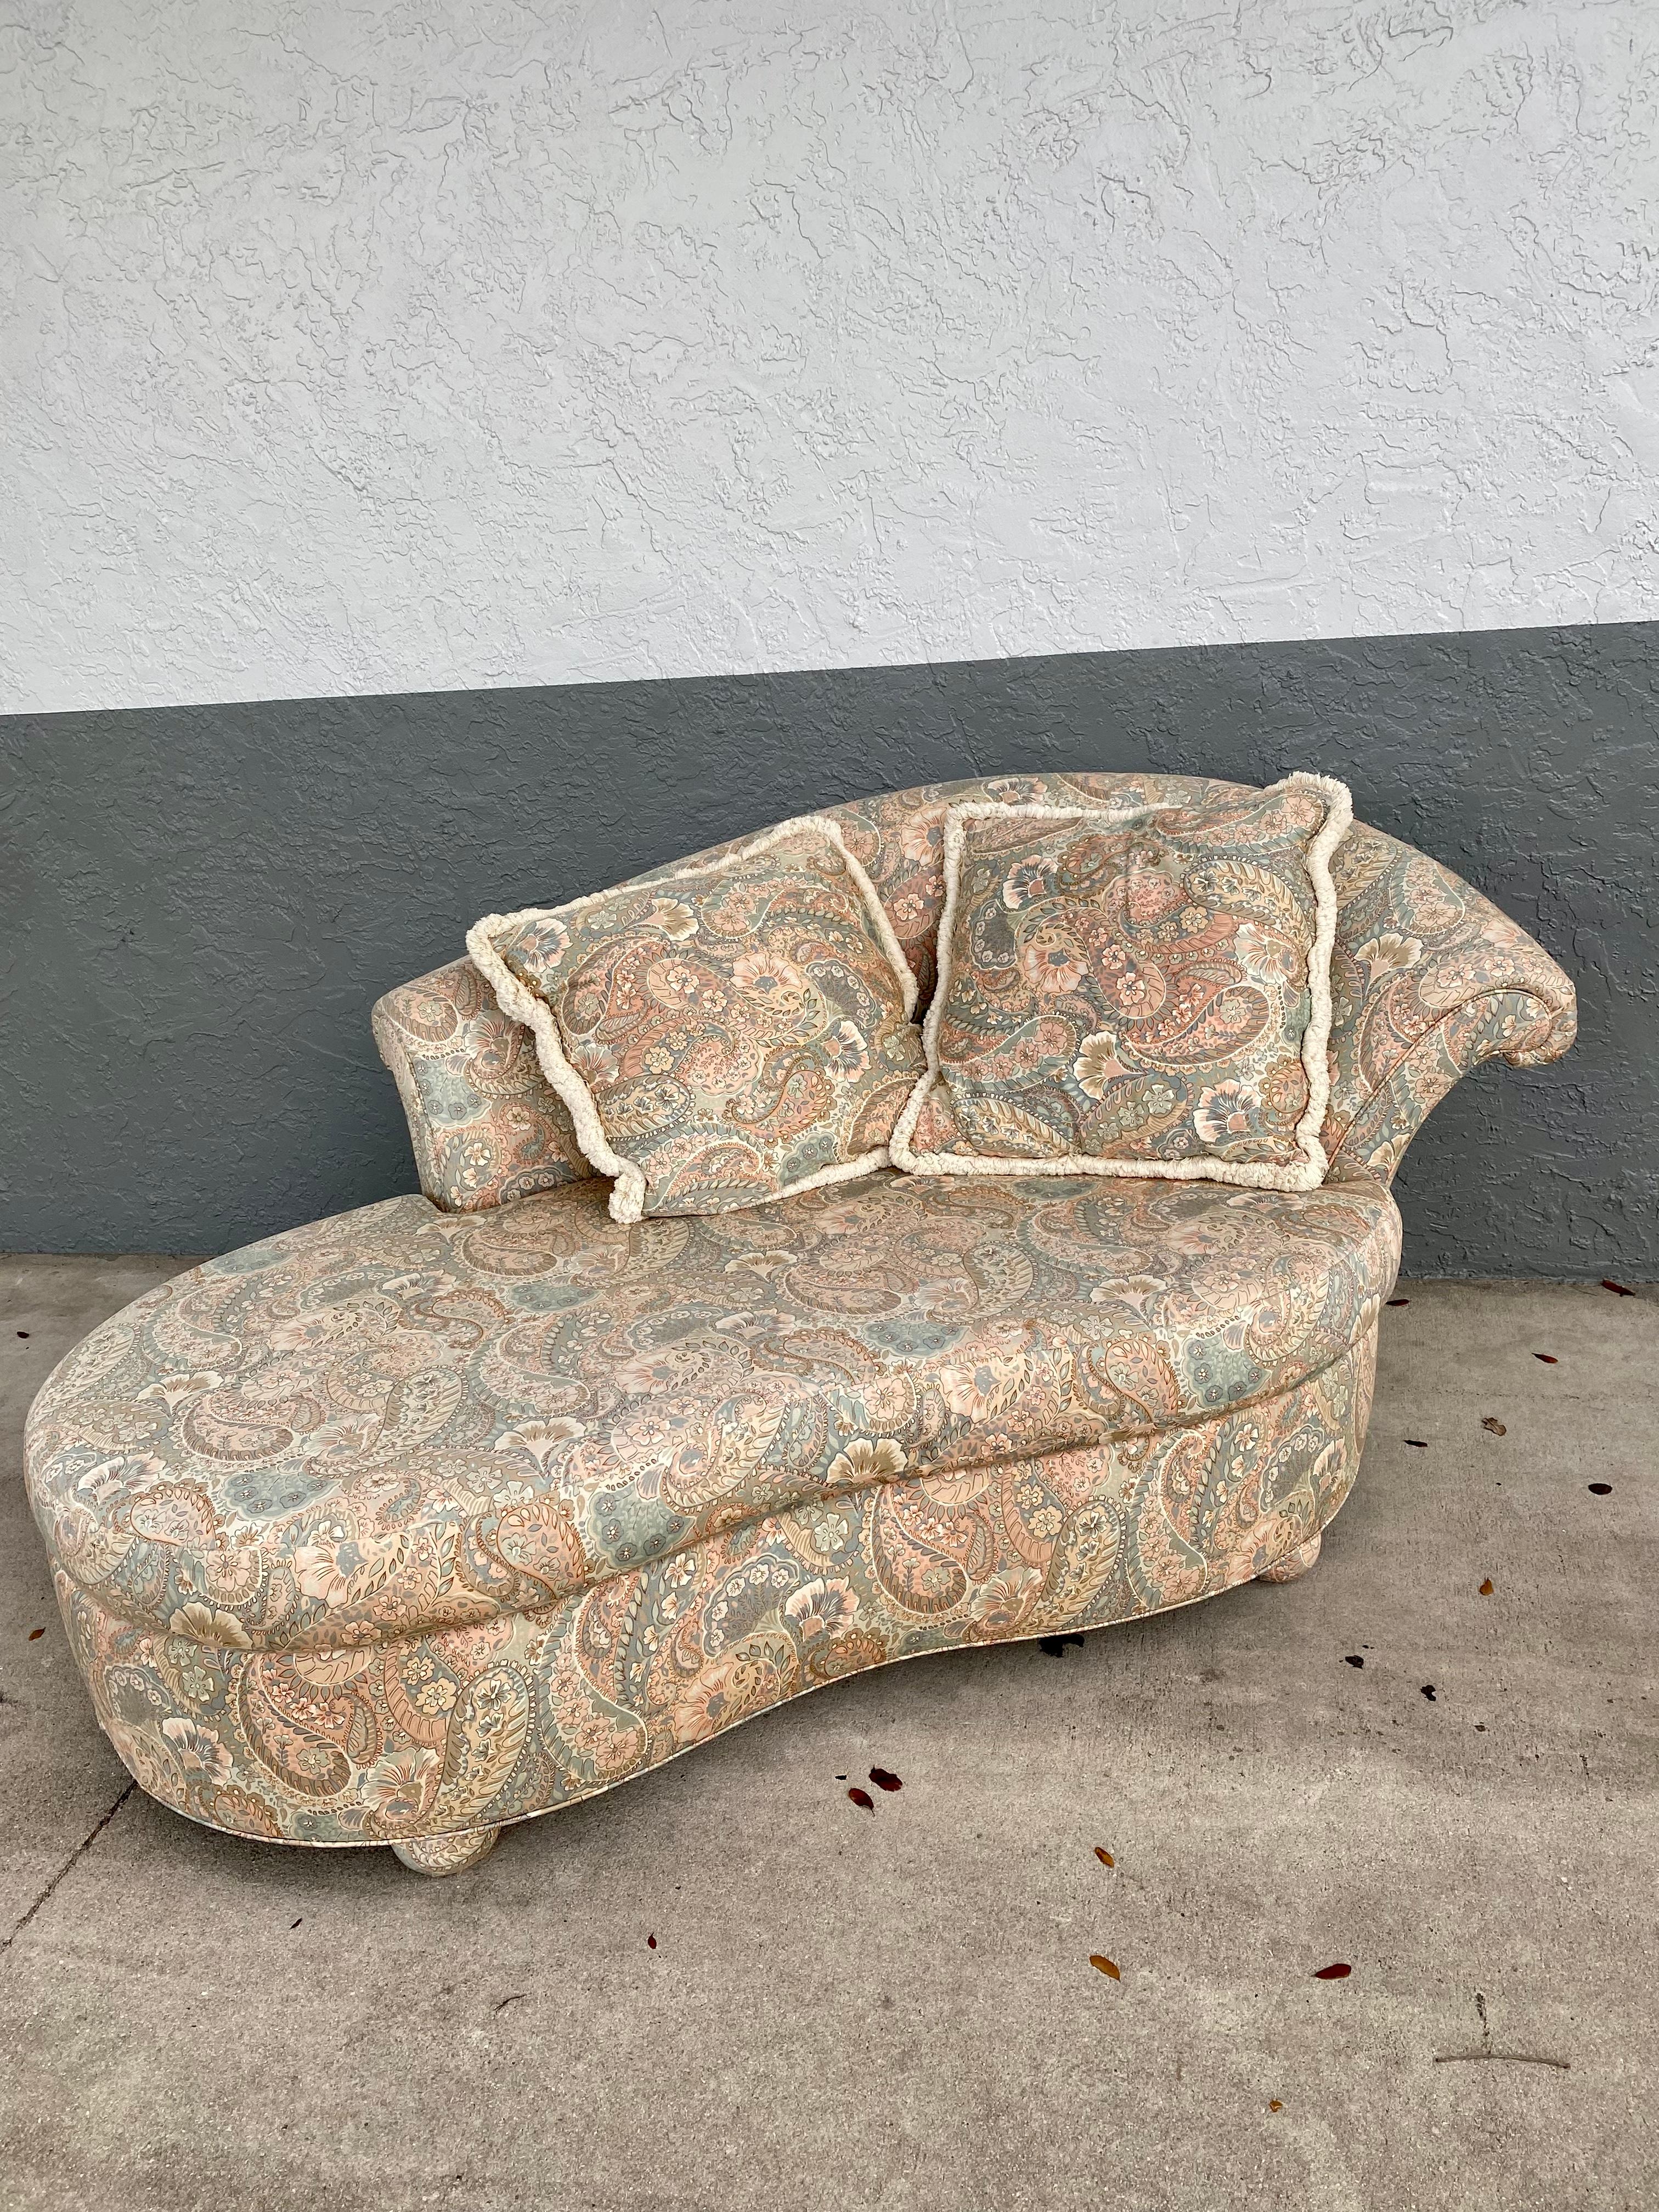 1980s Preview Paisley Kidney Sculptural Chaise In Good Condition For Sale In Fort Lauderdale, FL